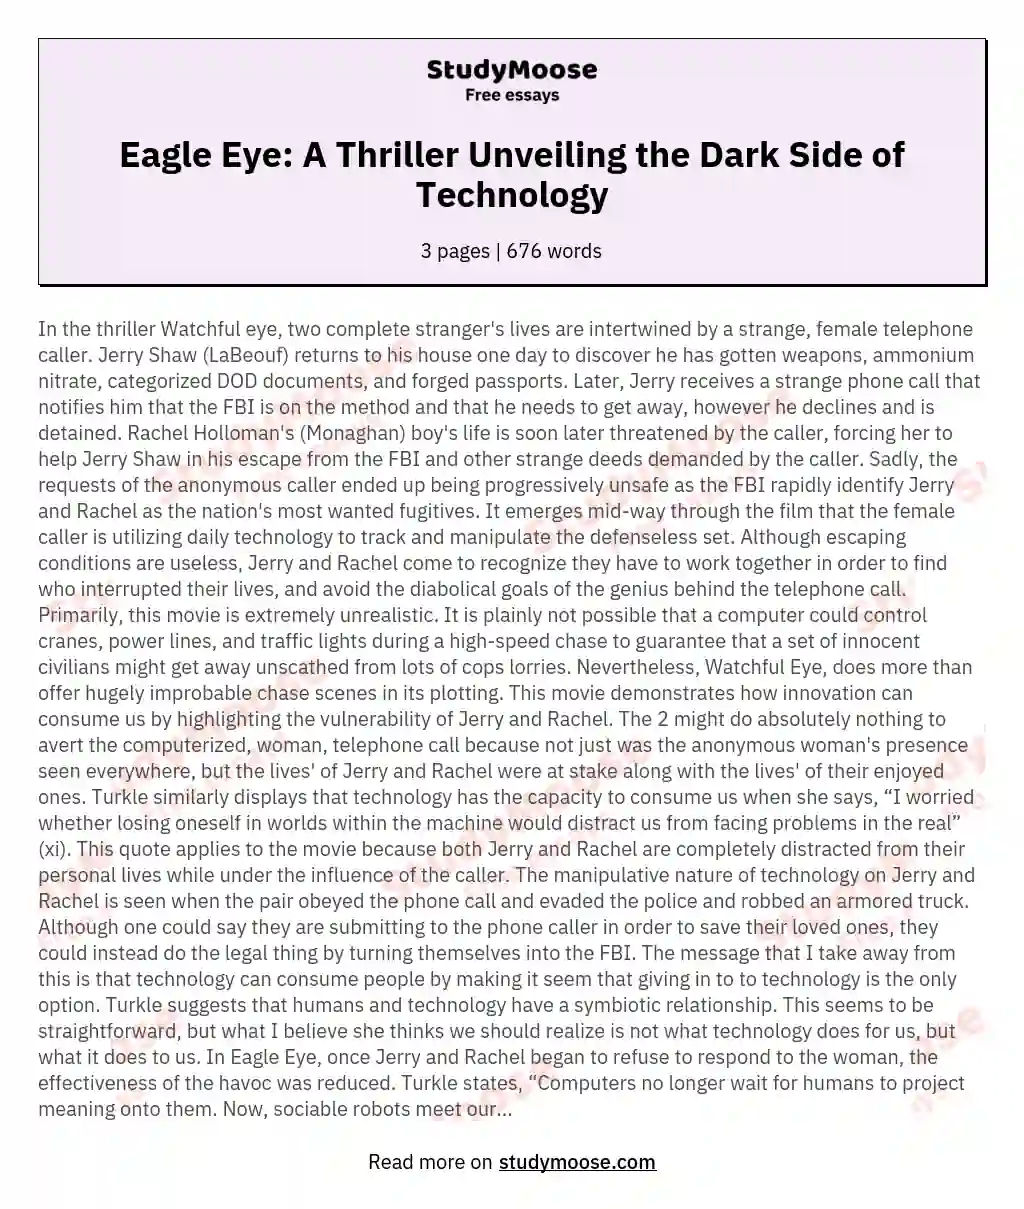 Eagle Eye: A Thriller Unveiling the Dark Side of Technology essay